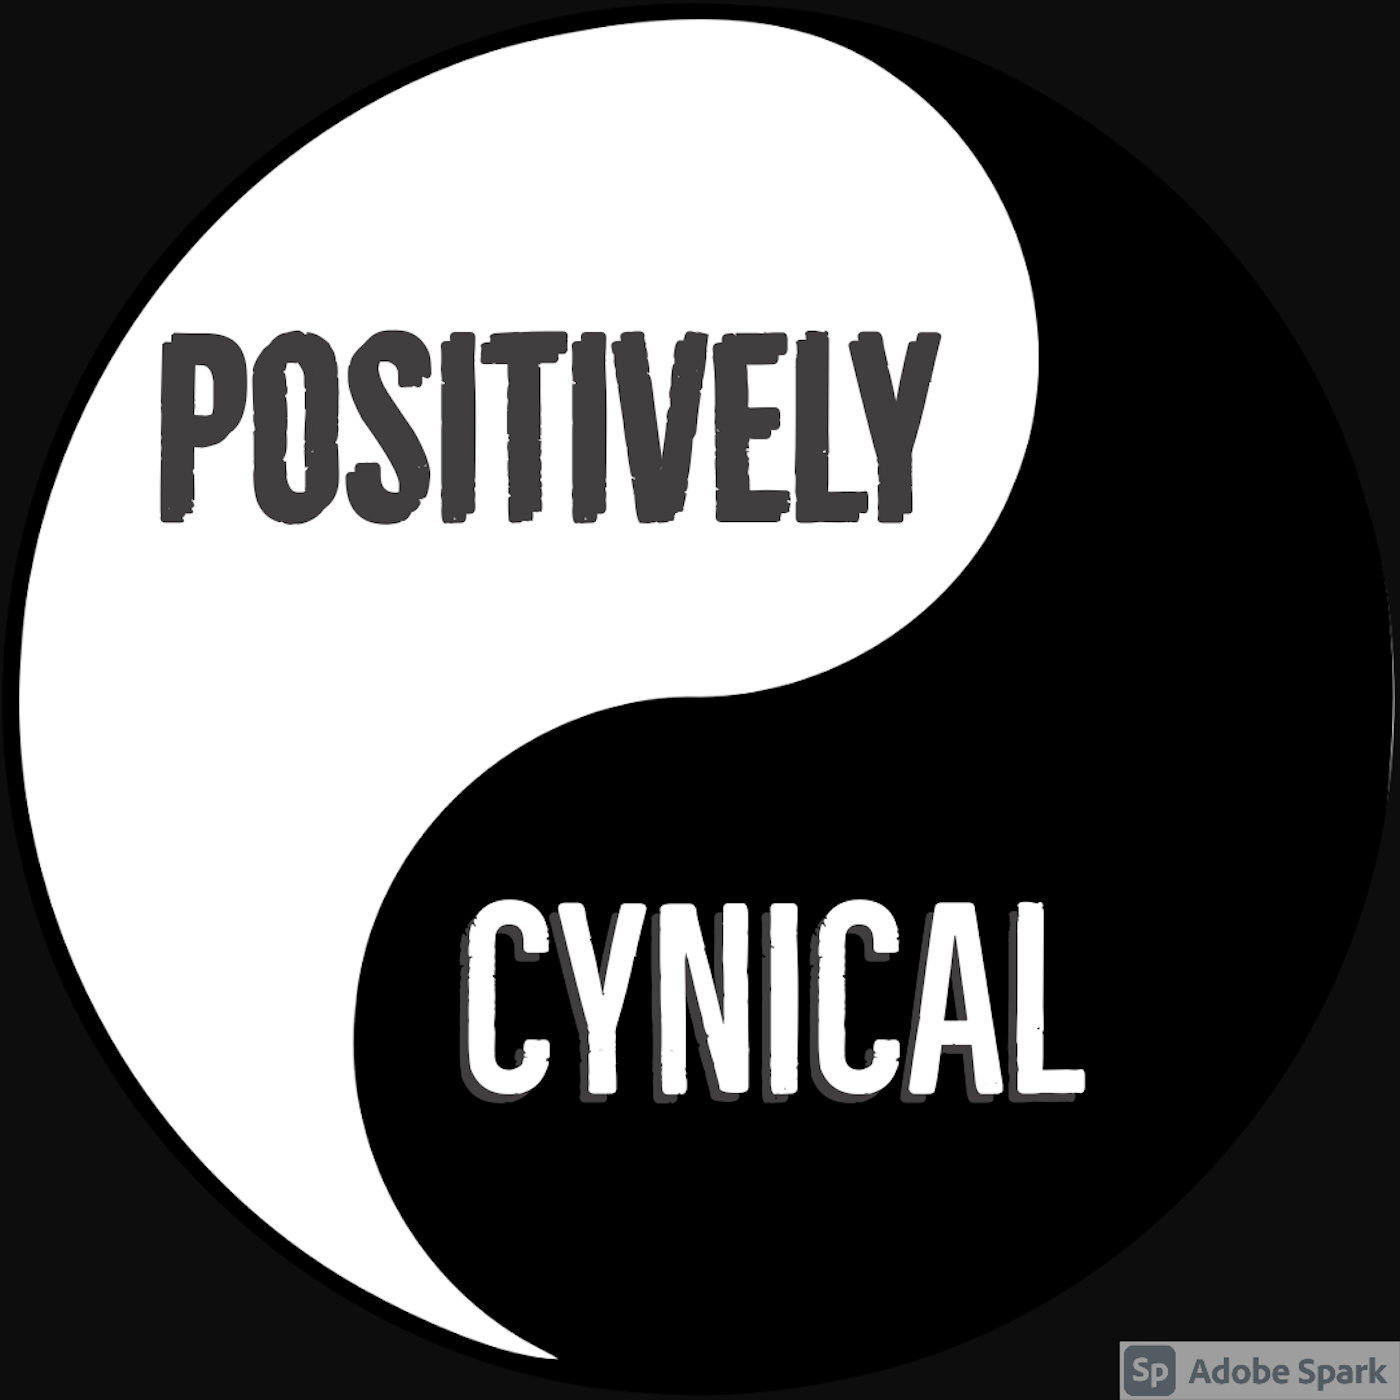 Positively Cynical's artwork